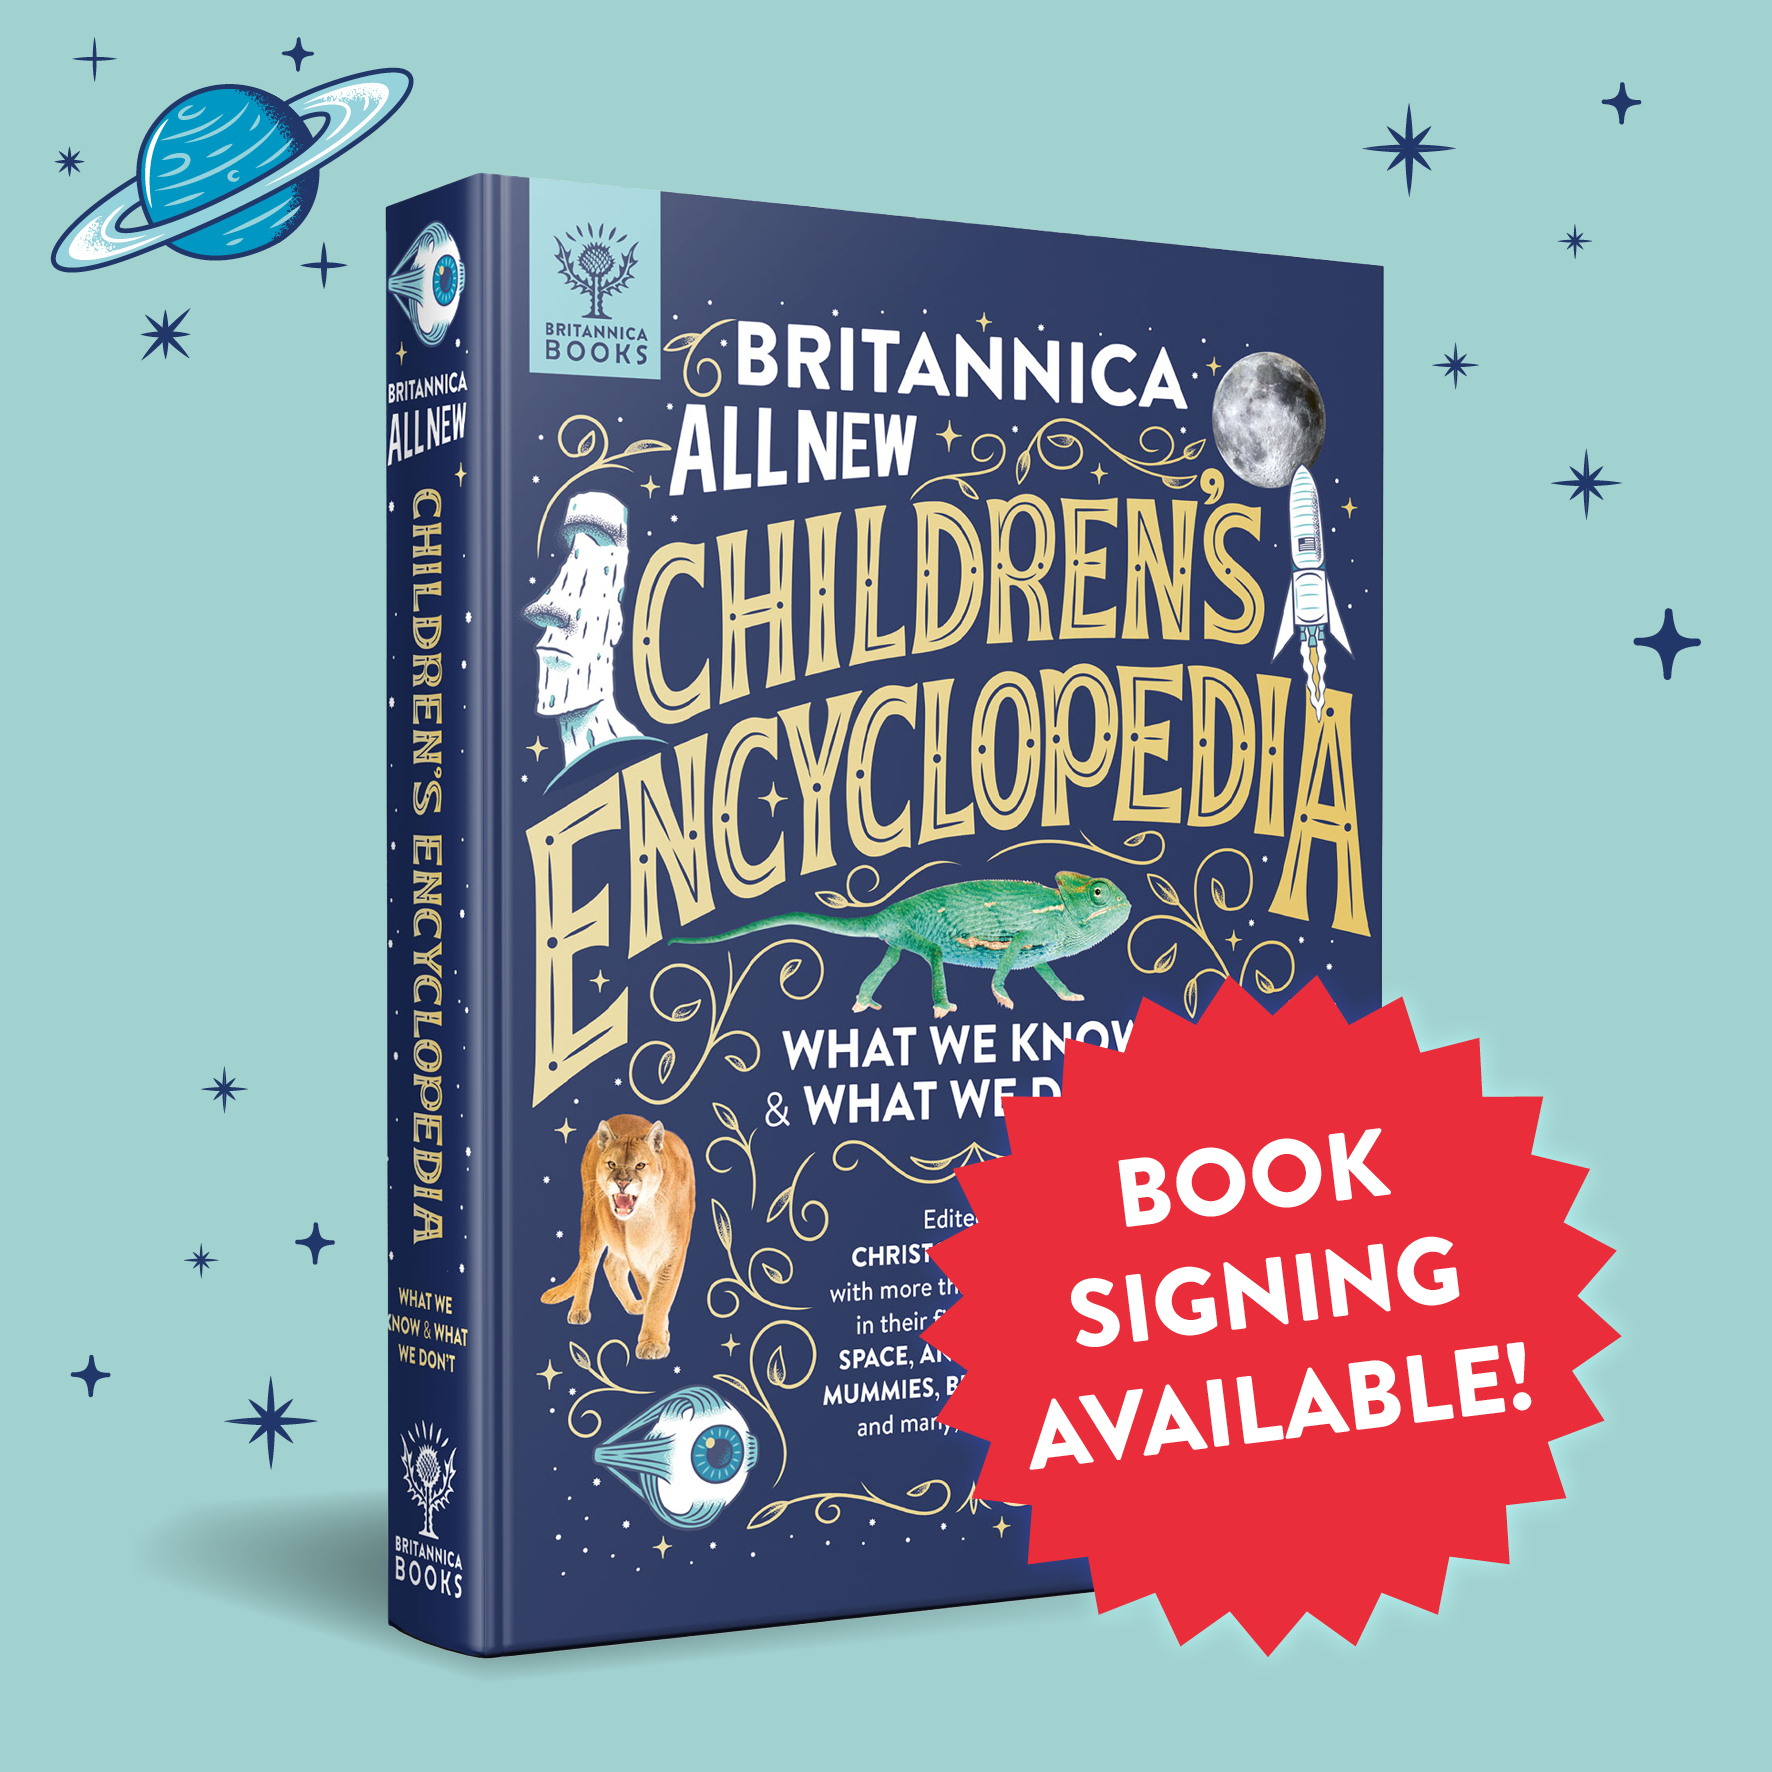 Get an <i>exclusive</i> signed copy of the Encyclopedia!